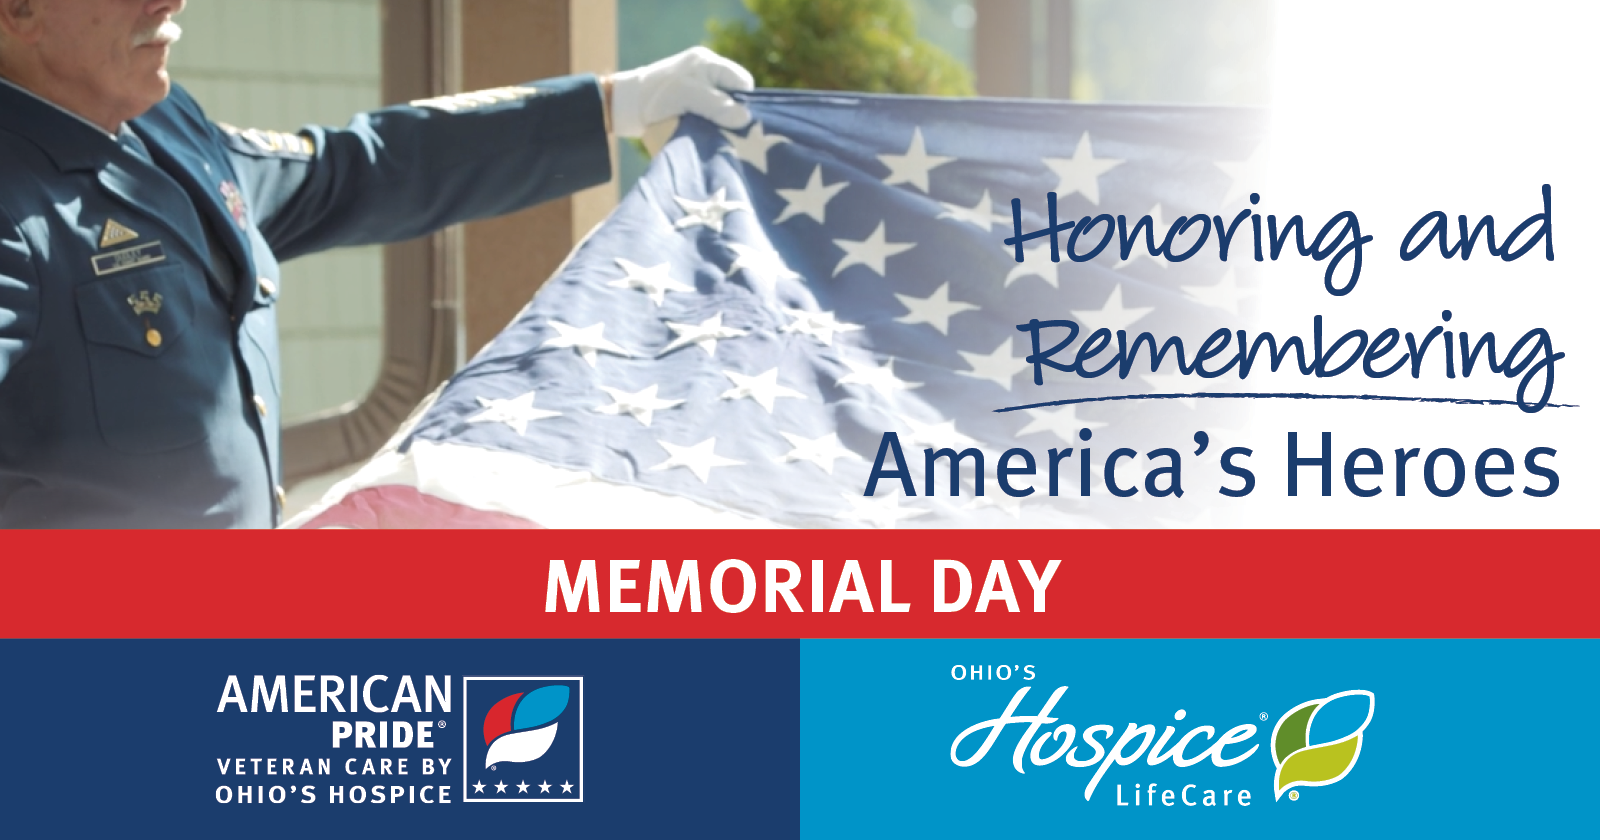 Honoring and Remembering America's Heroes on Memorial Day - Ohio's Hospice LifeCare